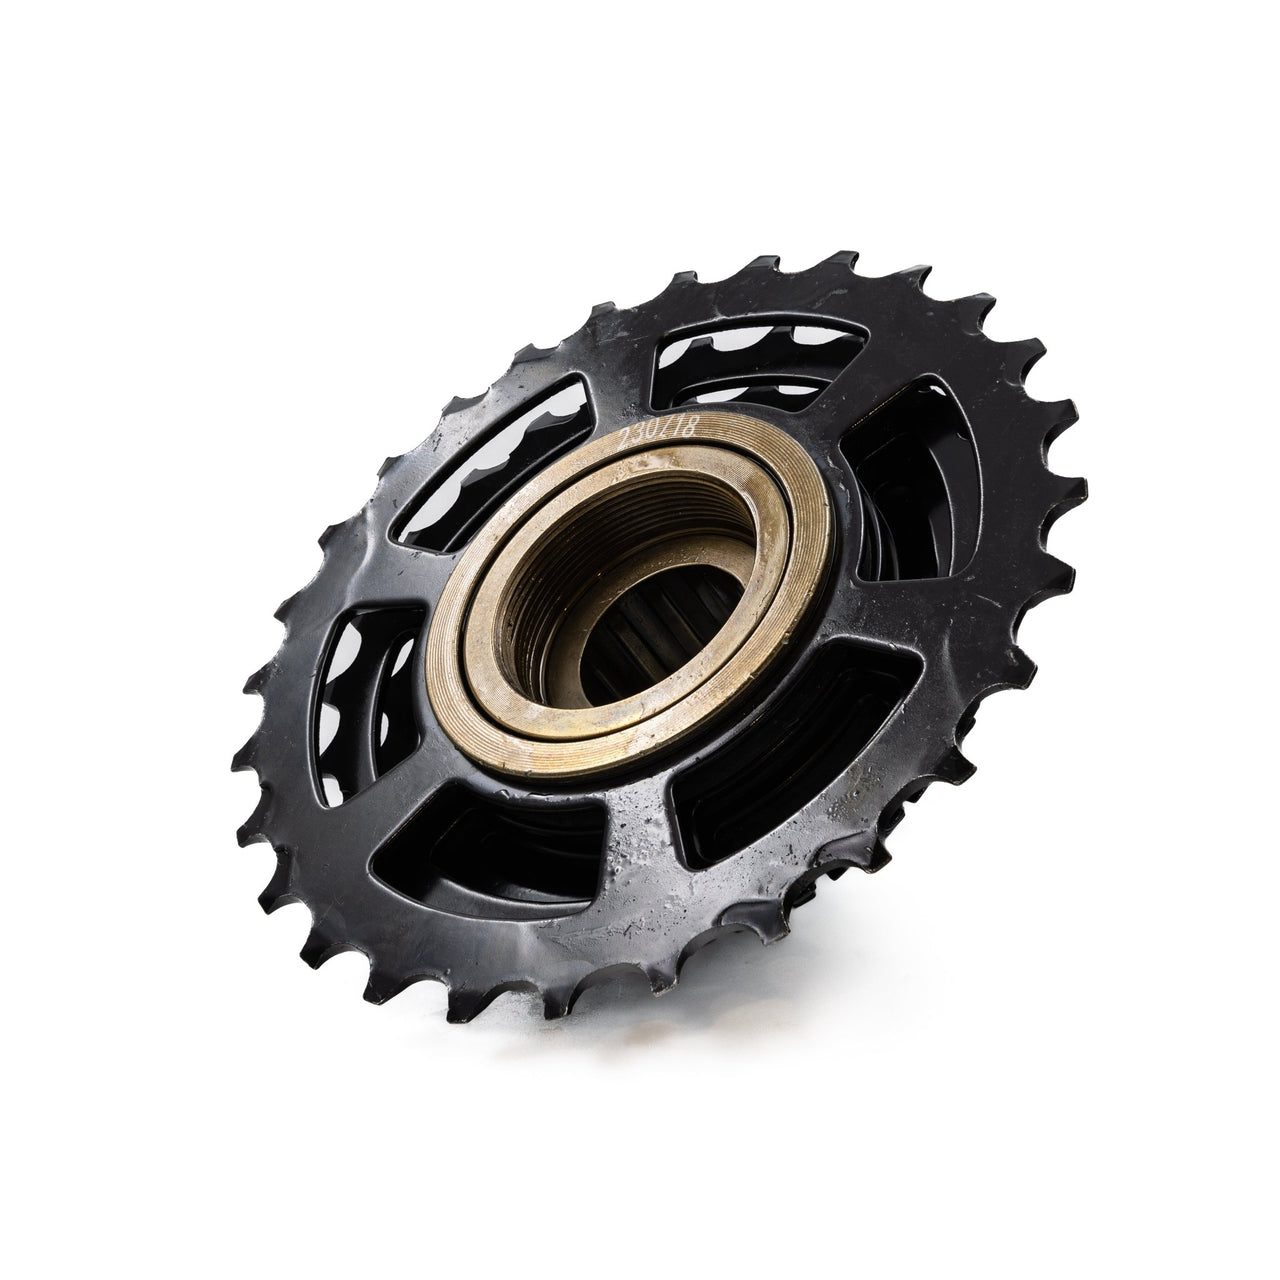 7 Speed 14-28T Indexed Freewheel Shimano Compatible Cassette Black Rust-Proof - Air BikeBicycle Cassettes & Freewheels